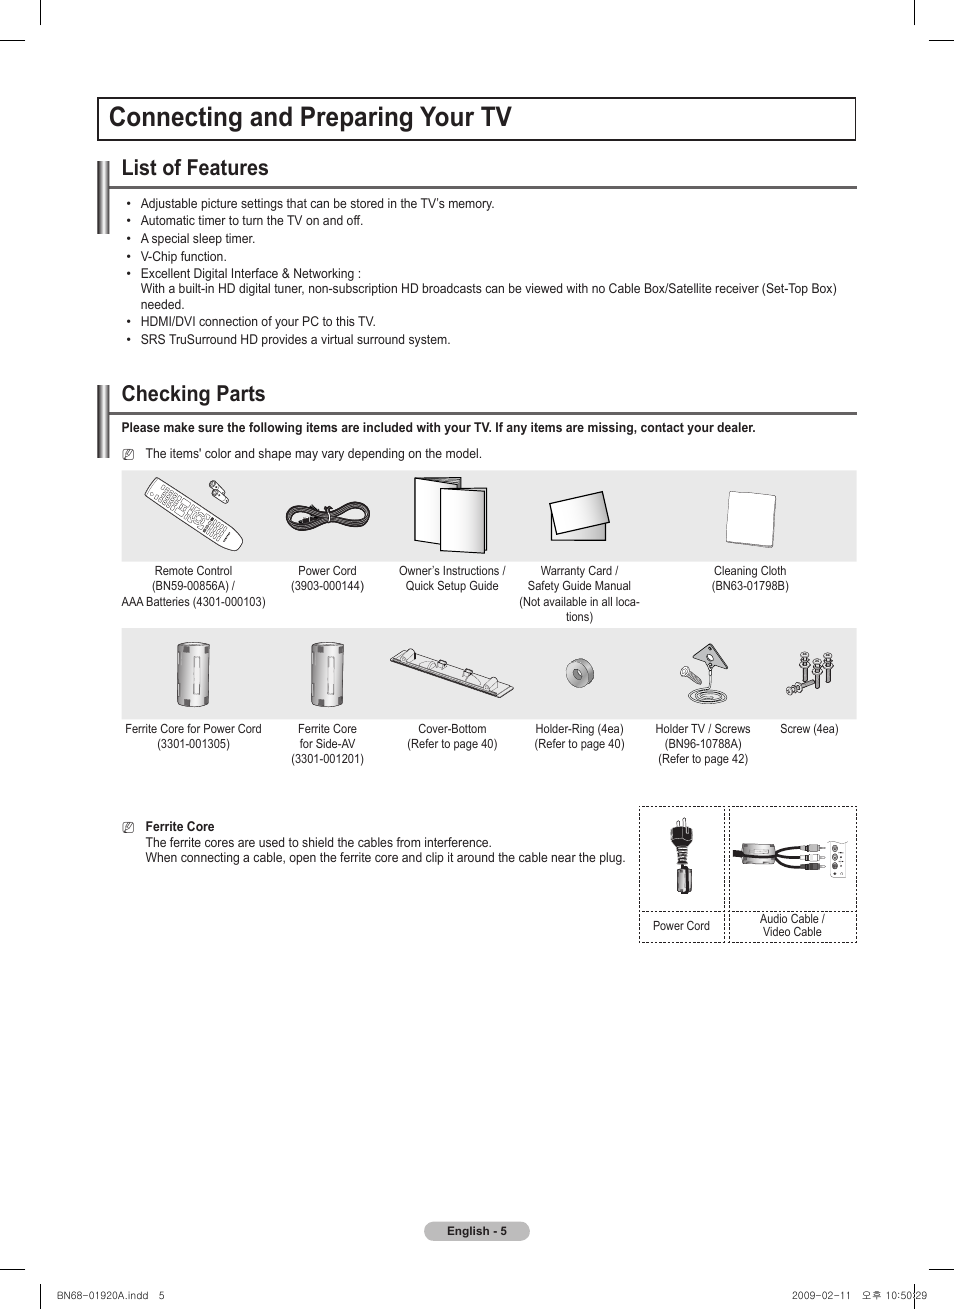 Connecting and preparing your tv, List of features, Checking parts Samsung PN42B450B1DXZA User